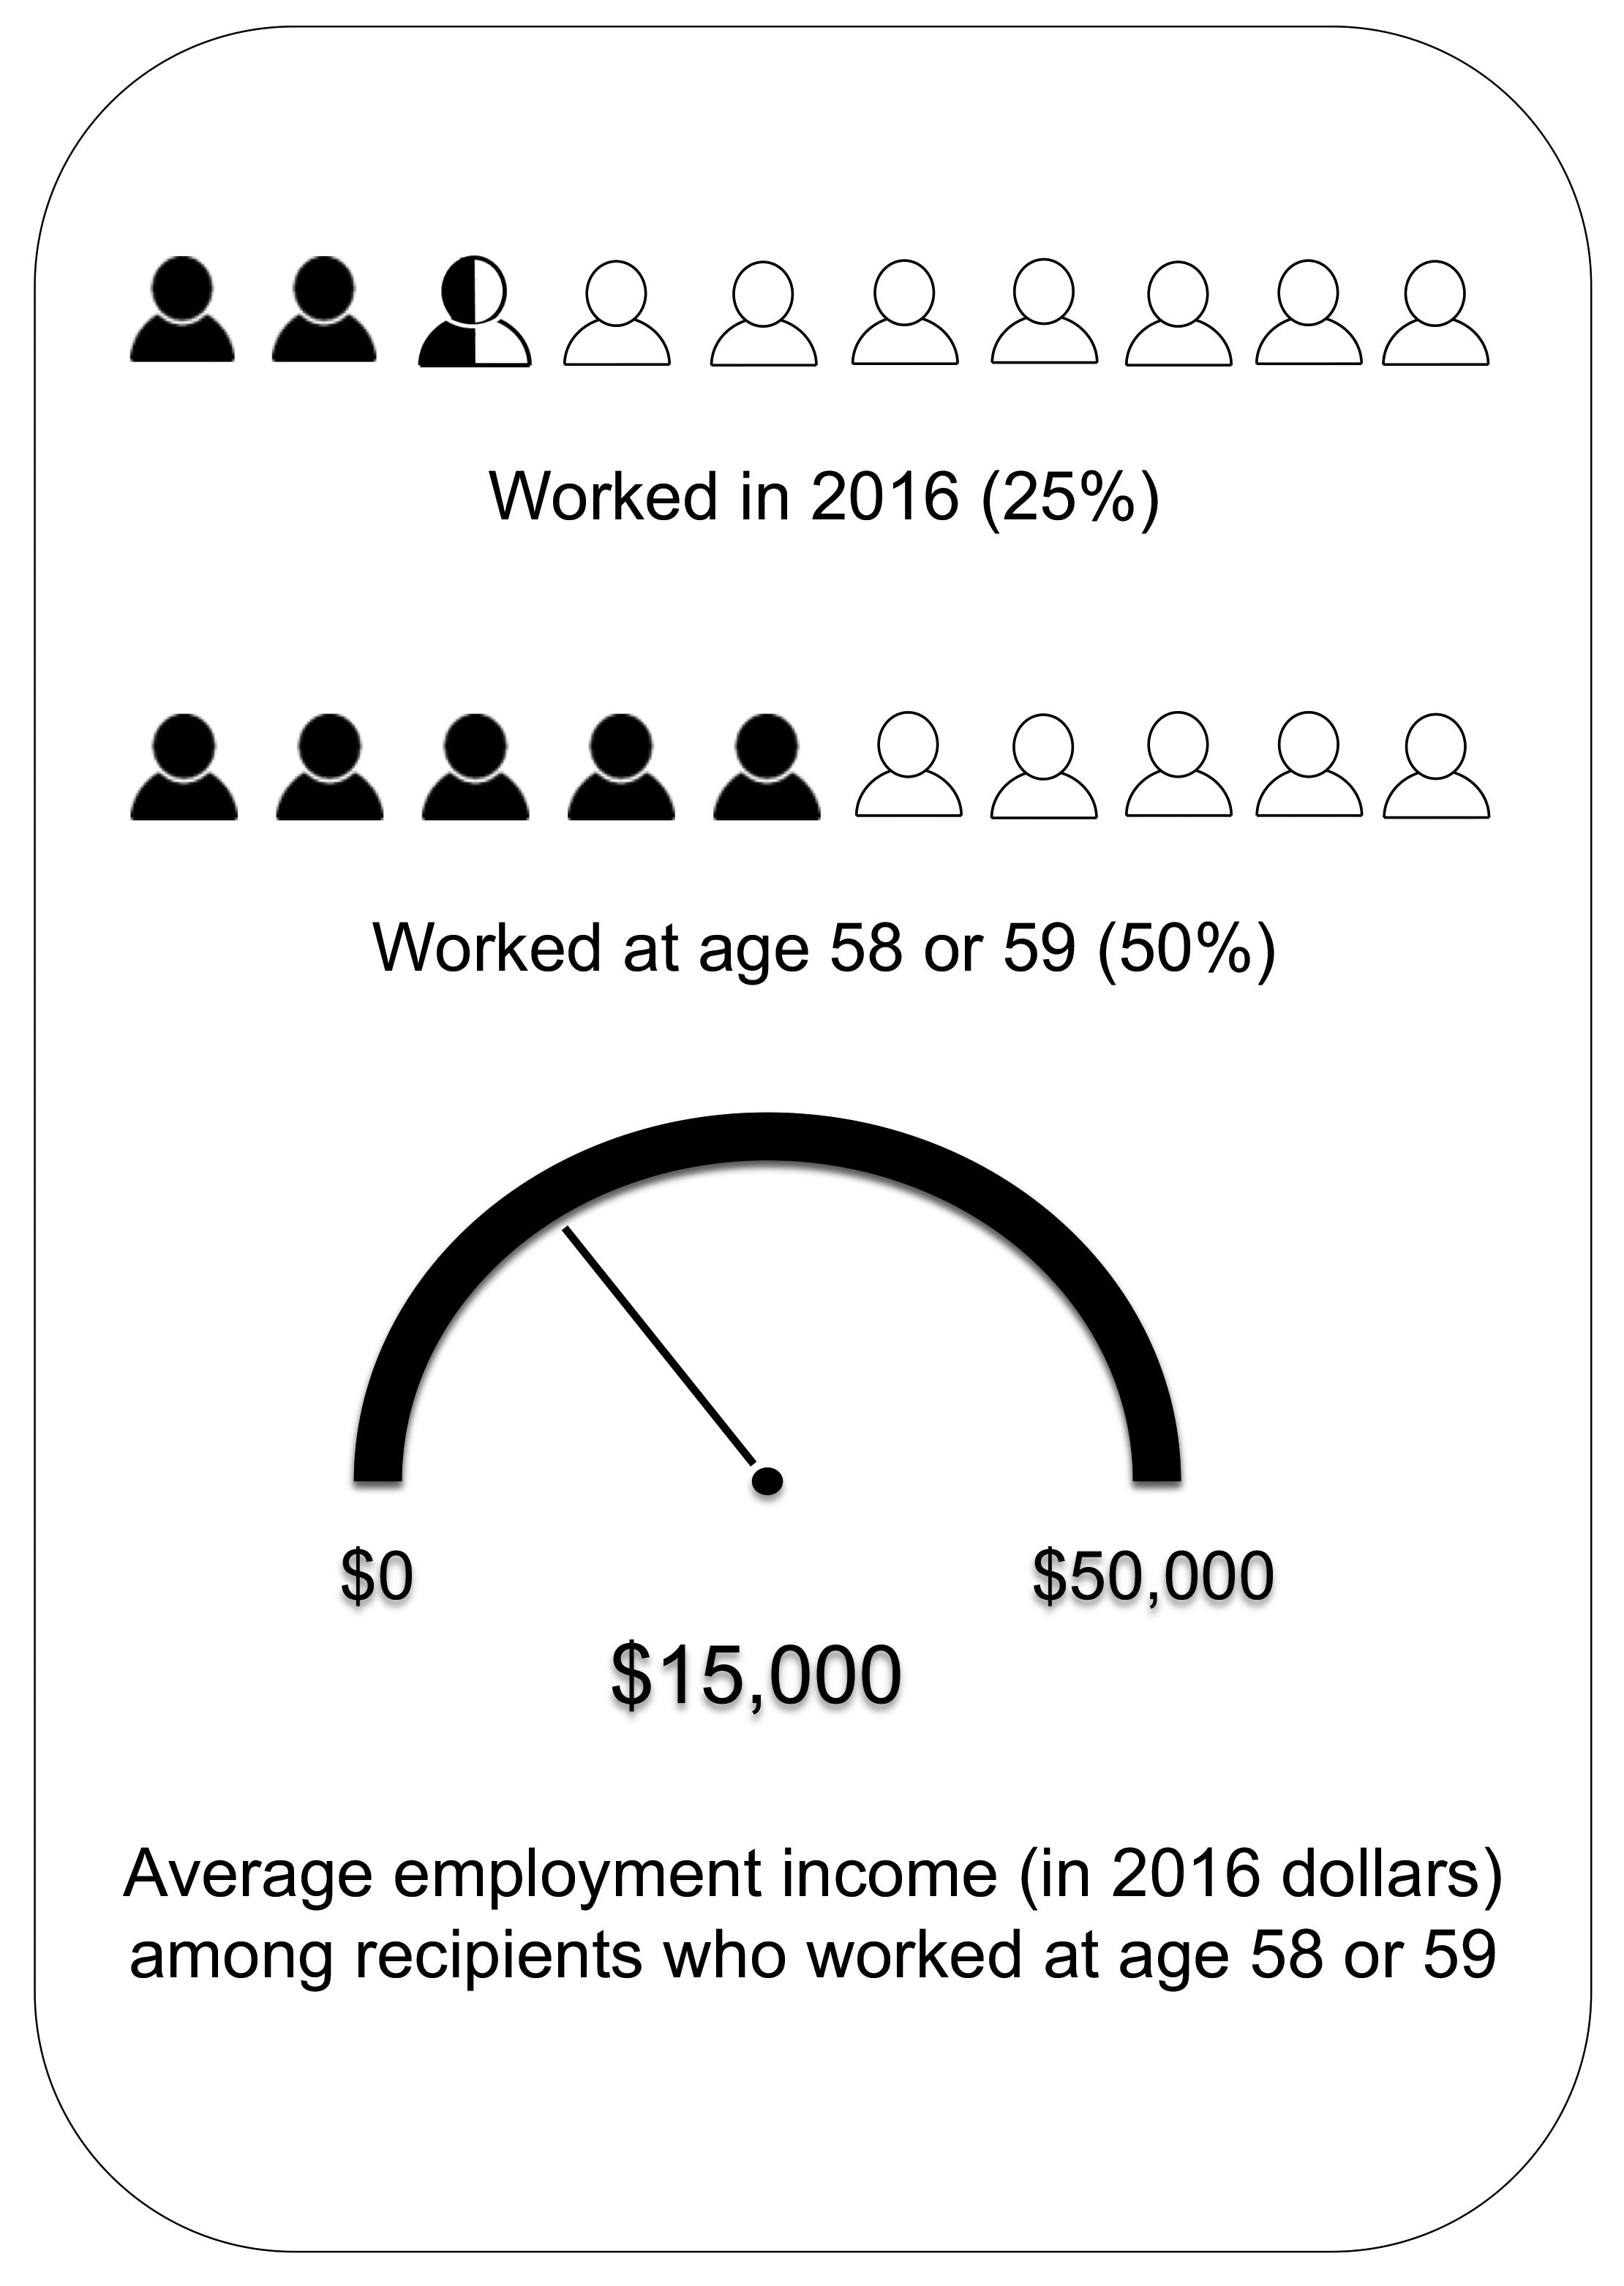 An image presenting the proportion of 2016 recipients of the Allowances who worked in 2016, worked at age 58 or 59, and their average employment income.: description follows